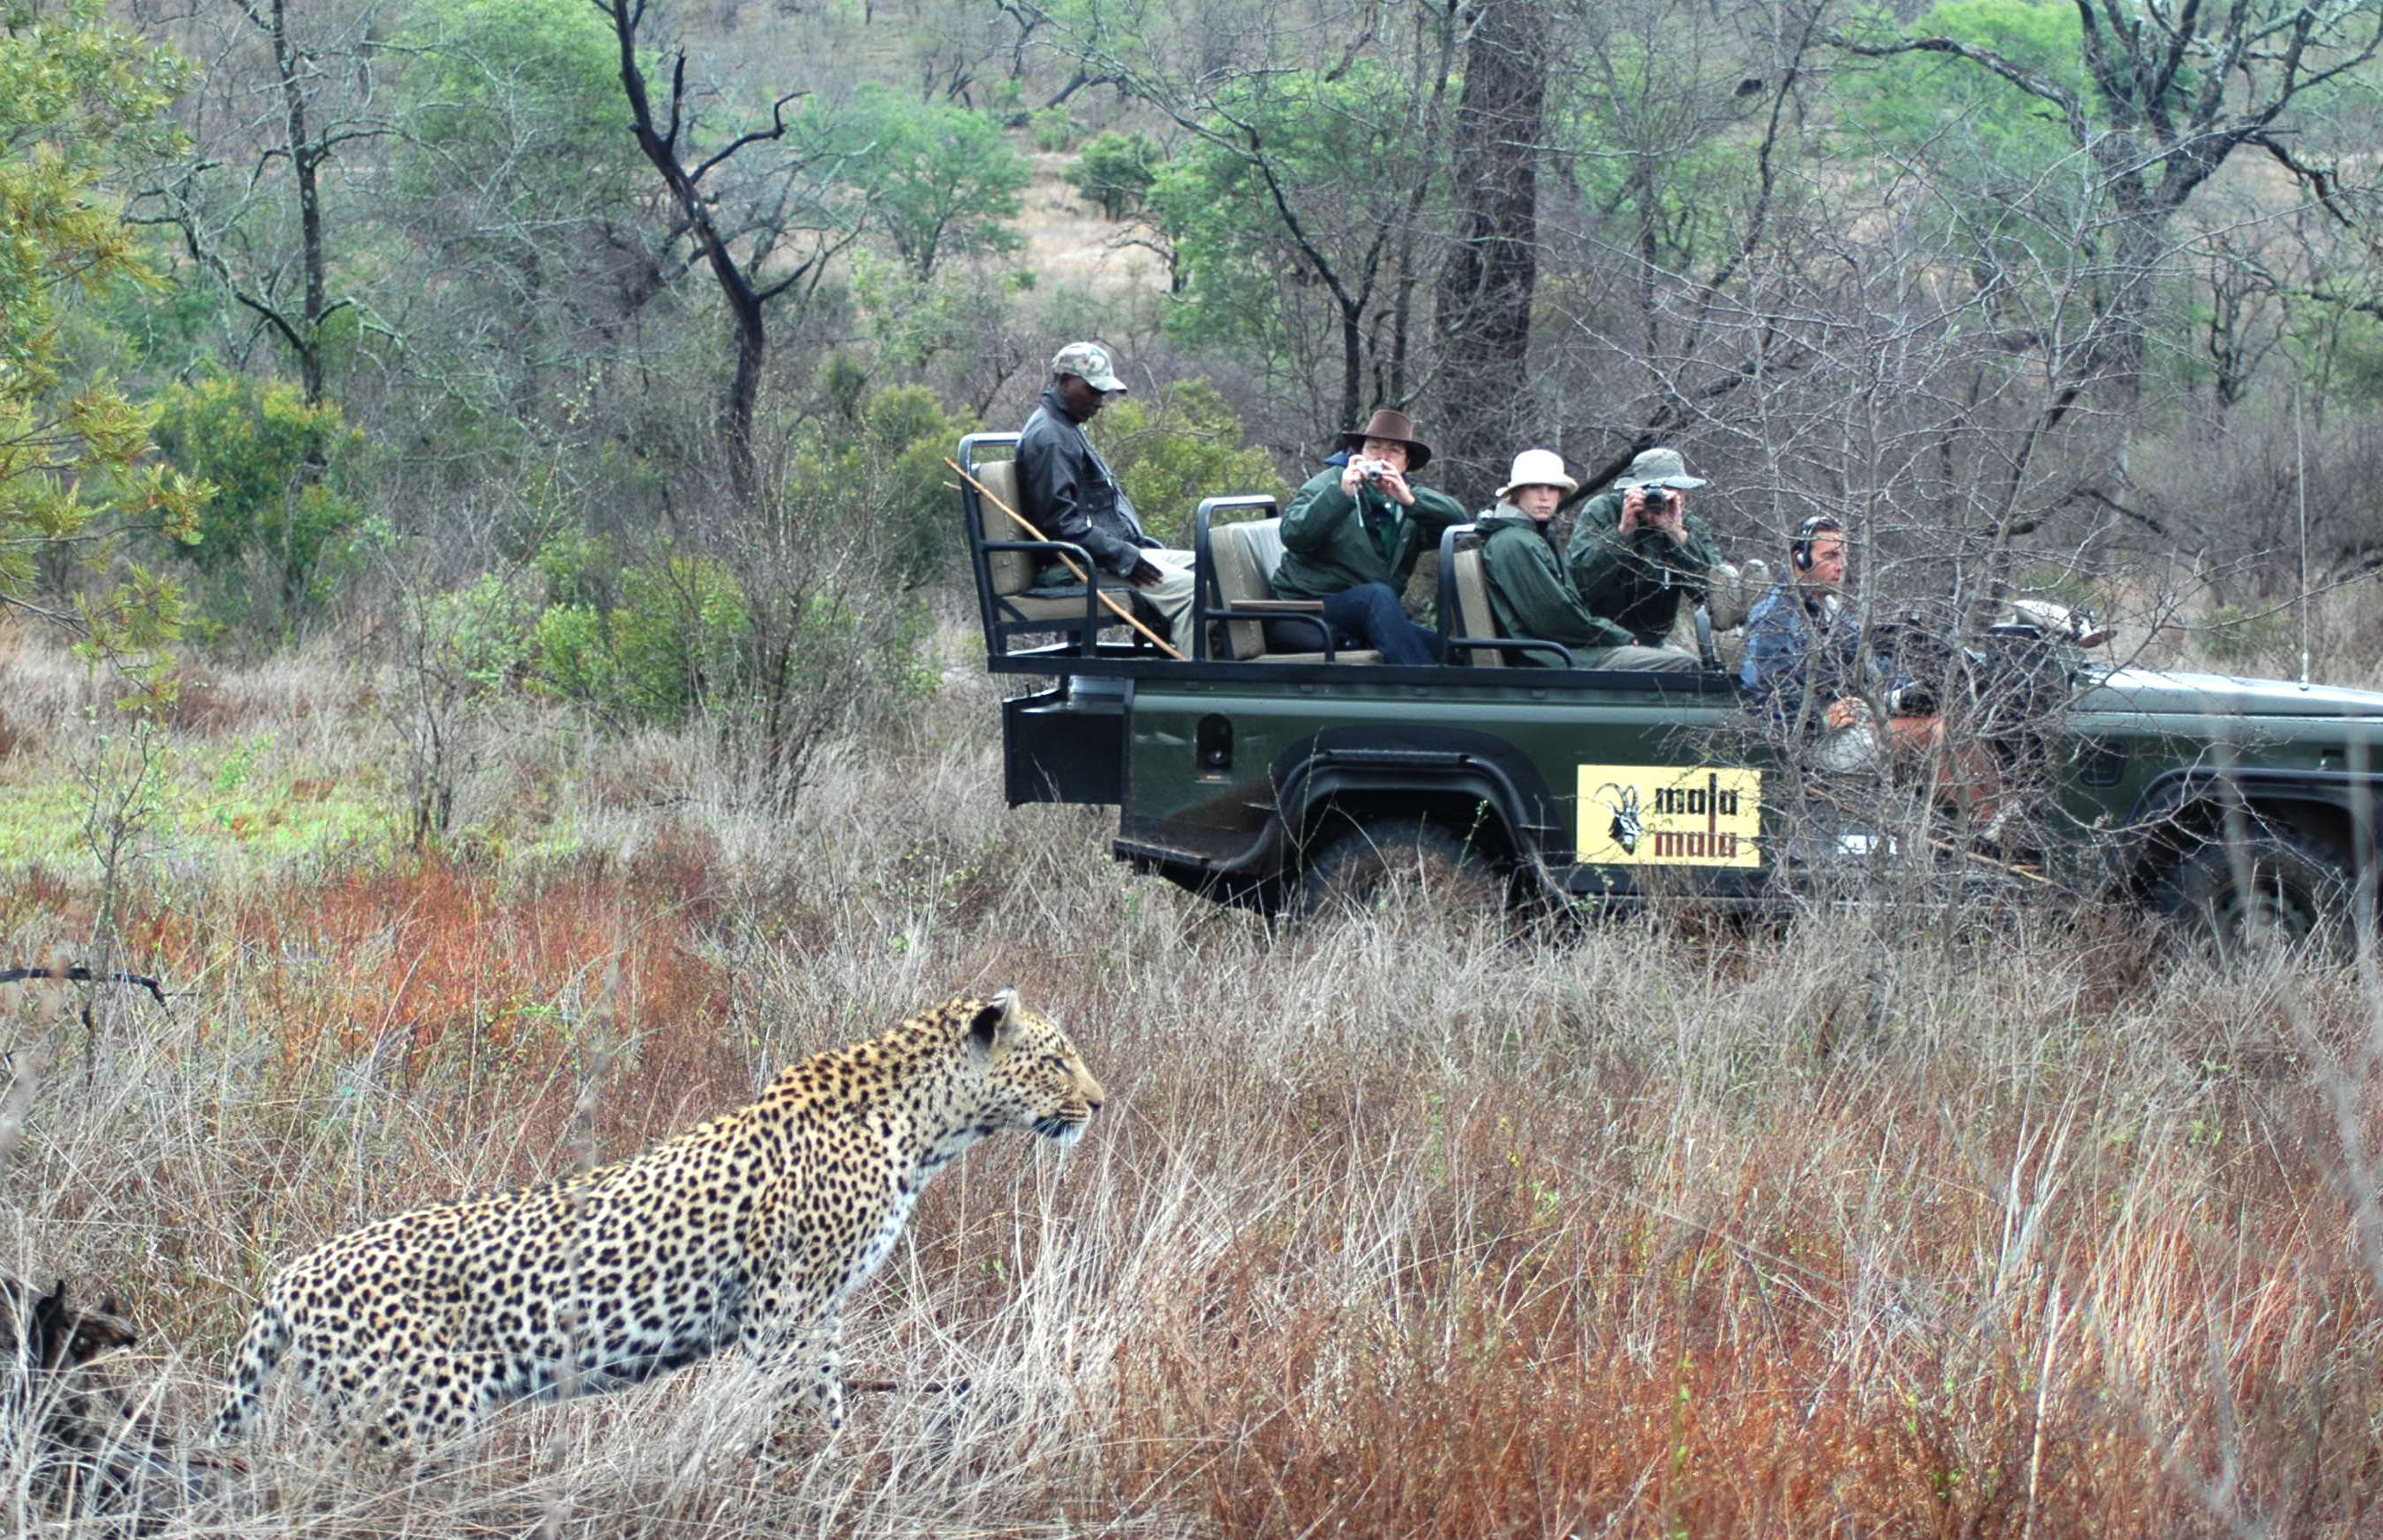 Travelers scouting in South Africa. Photo © Natural Habitat Adventures